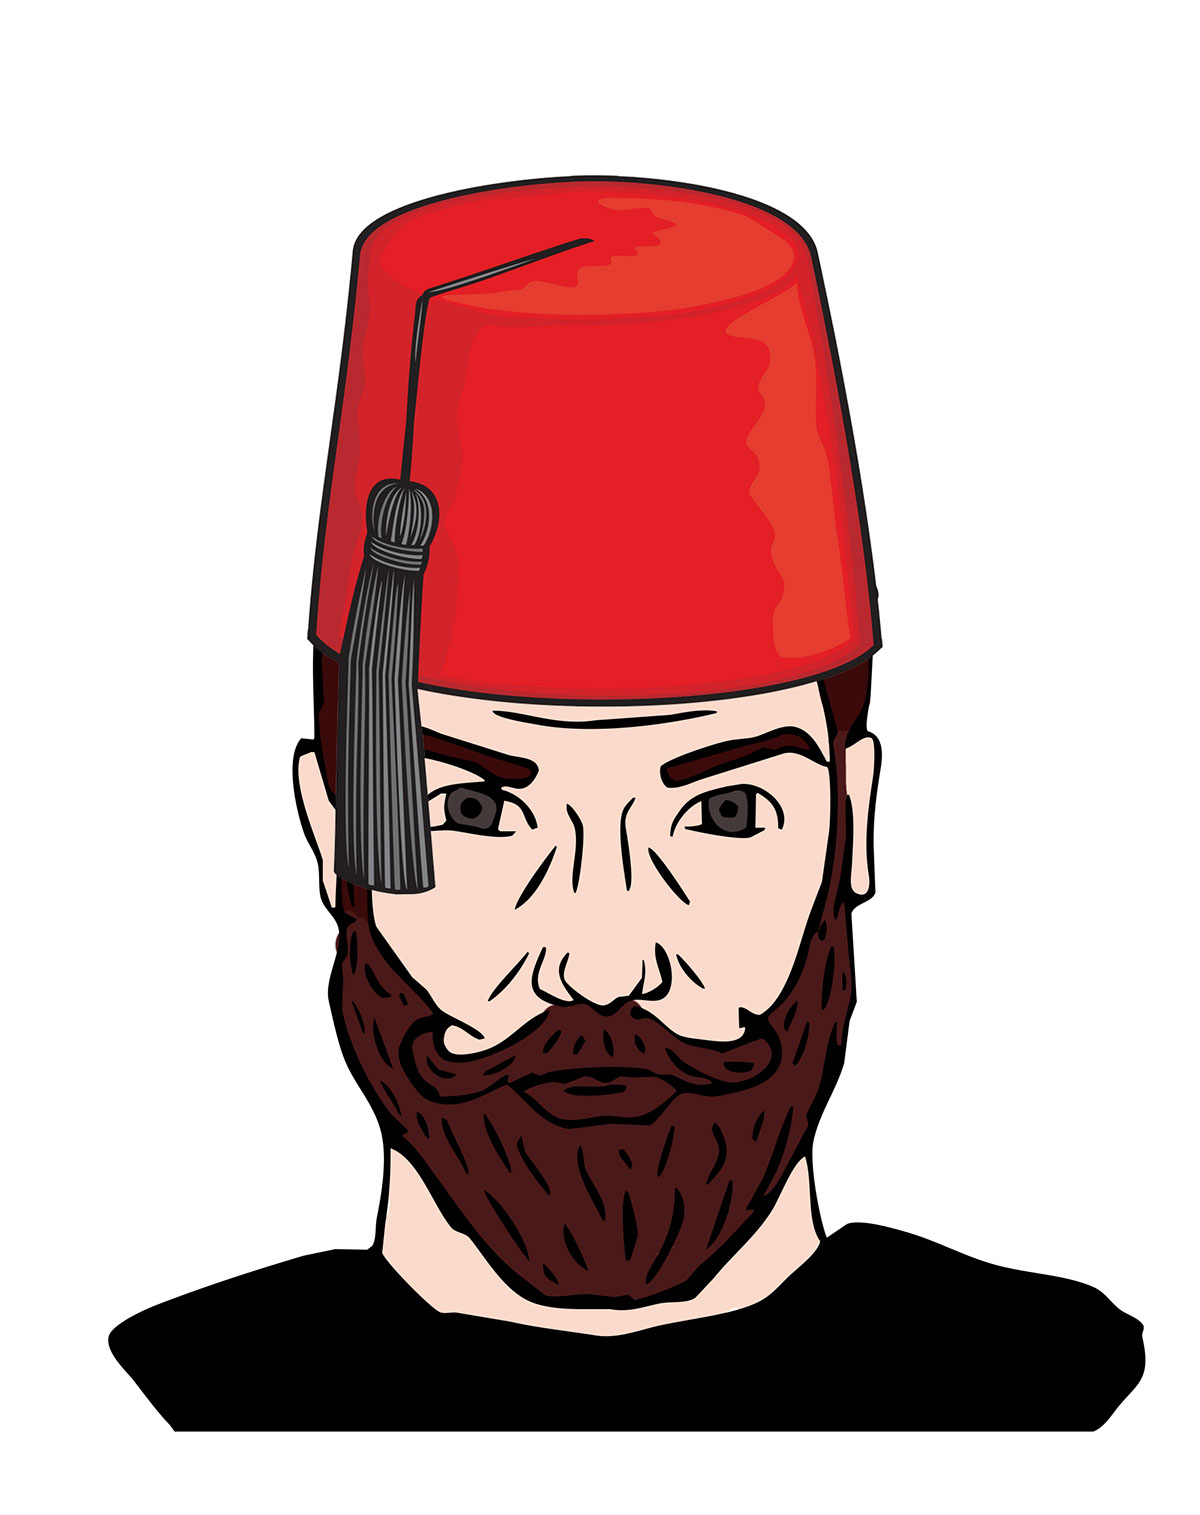 Moroccan Chad Character Front View rendition image